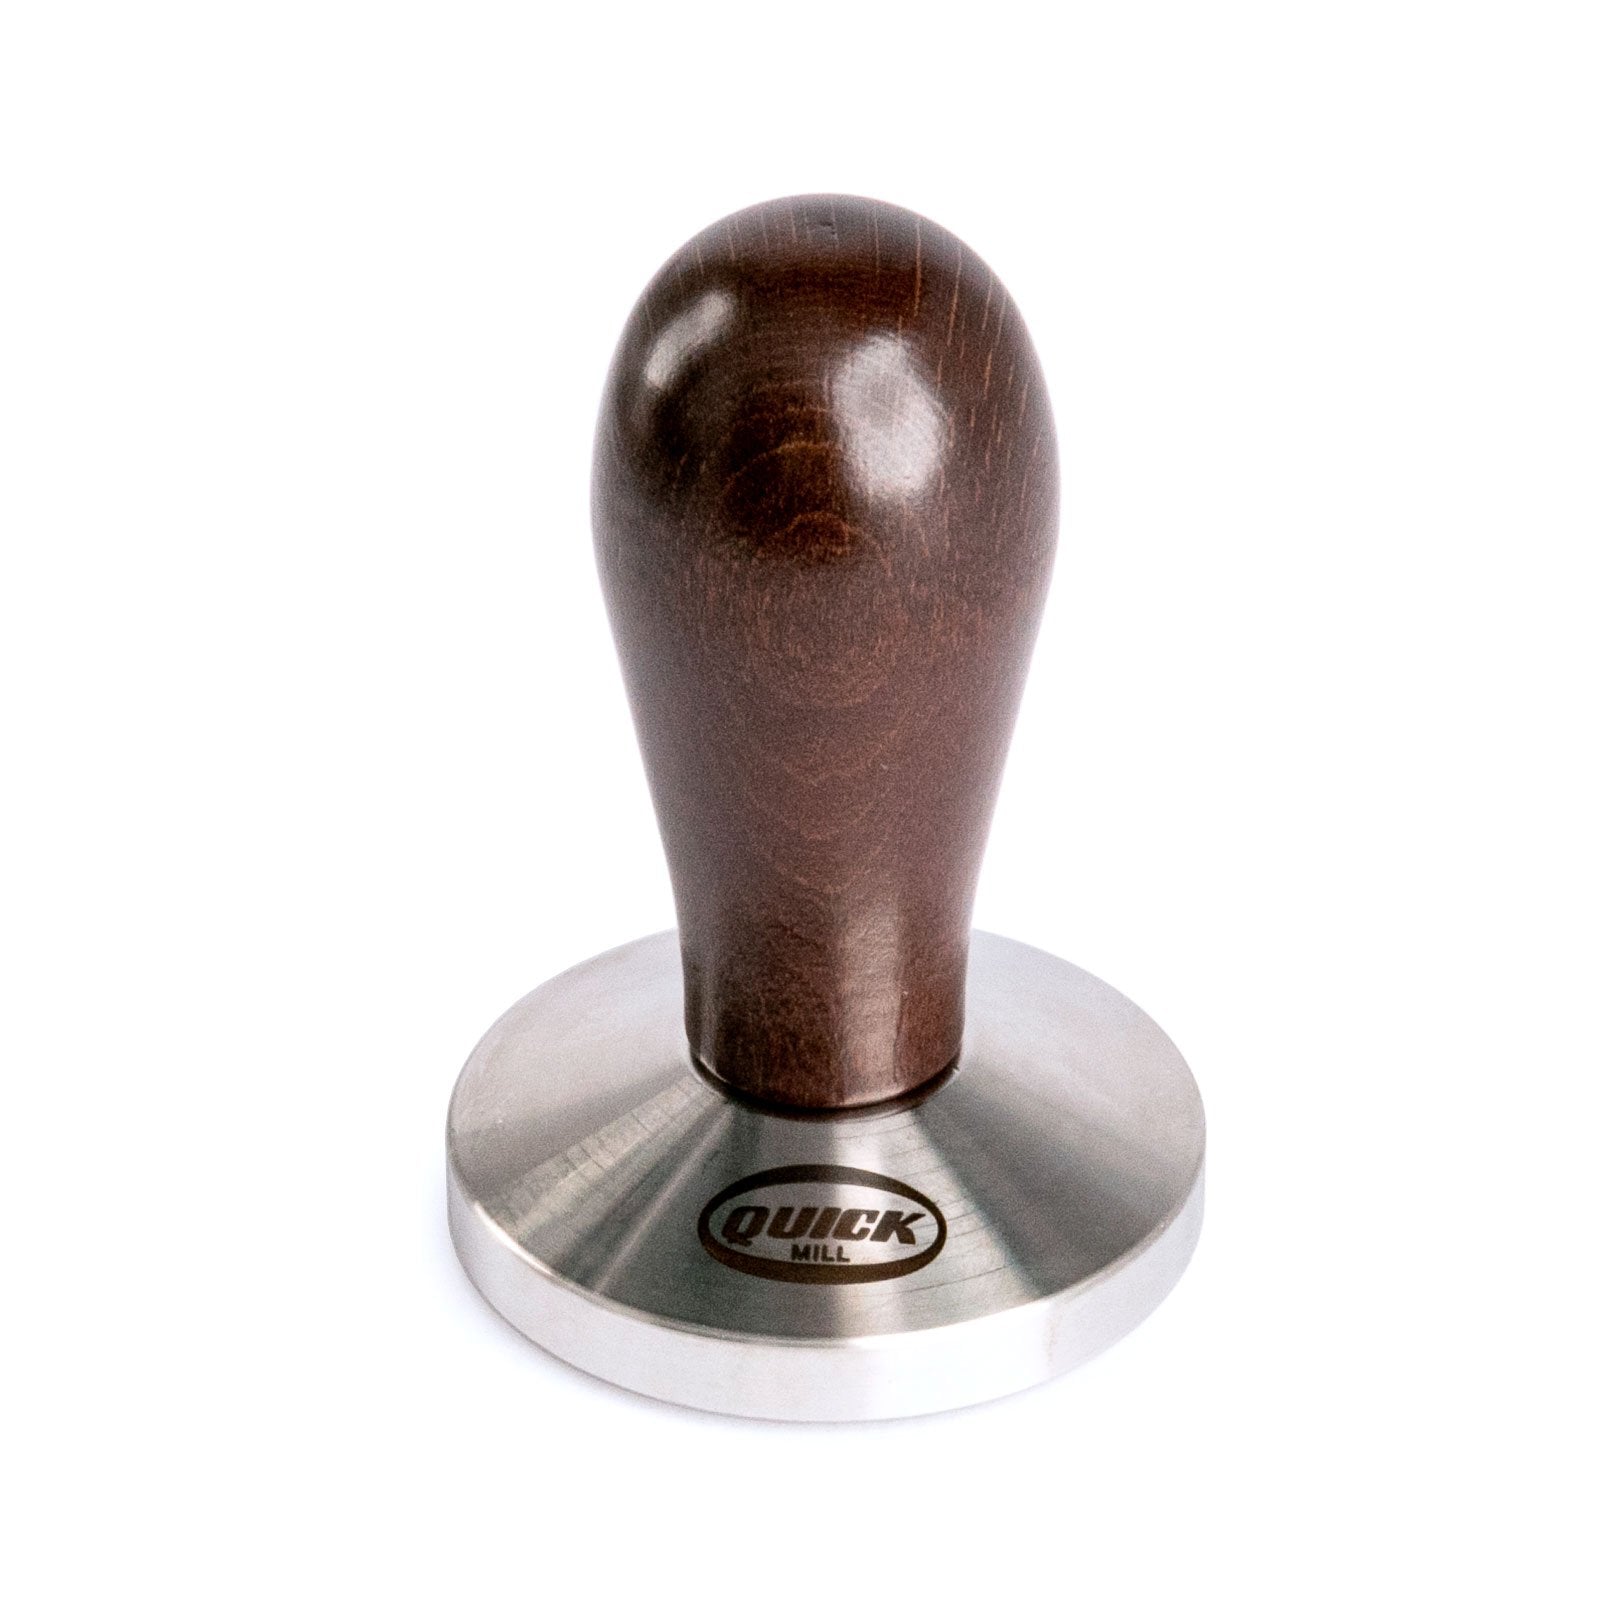 LUCCA M58 Espresso Machine Wood Handled Quick Mill Tamper, Clive Coffee - Knockout 